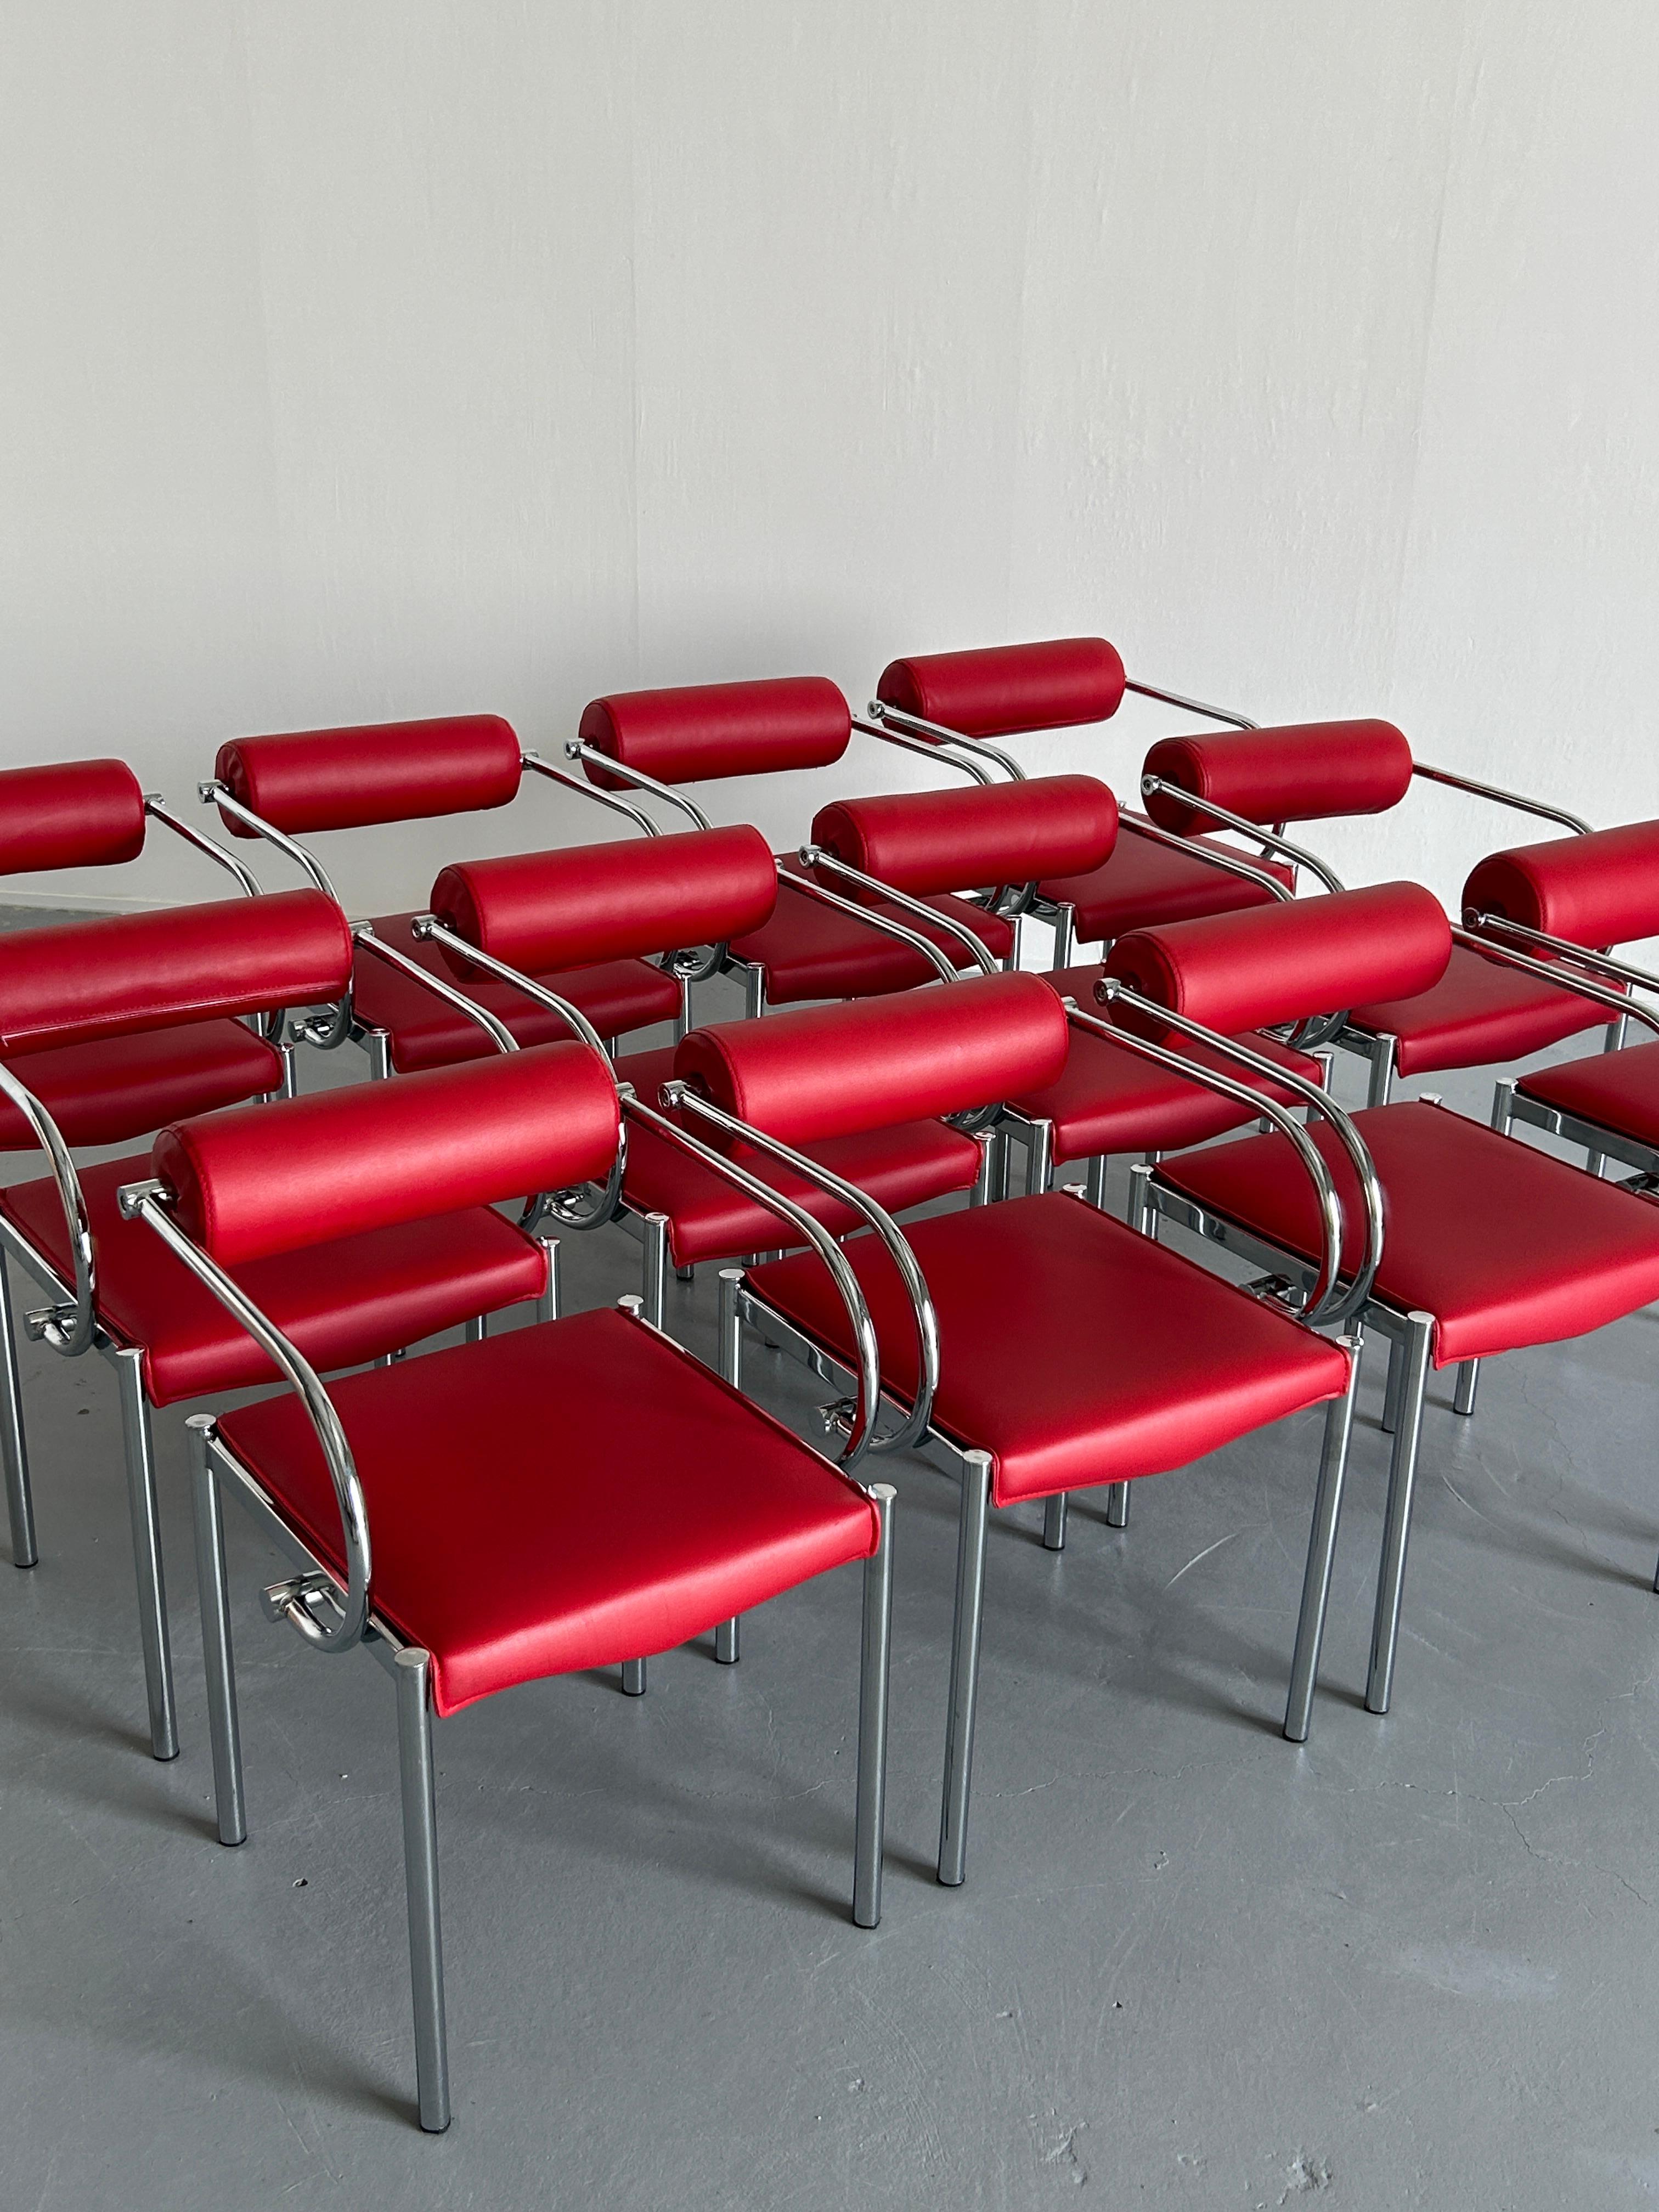 Vintage Postmodern Tubular Chairs in the style of Arcadia Chairs by Paolo Piva 1